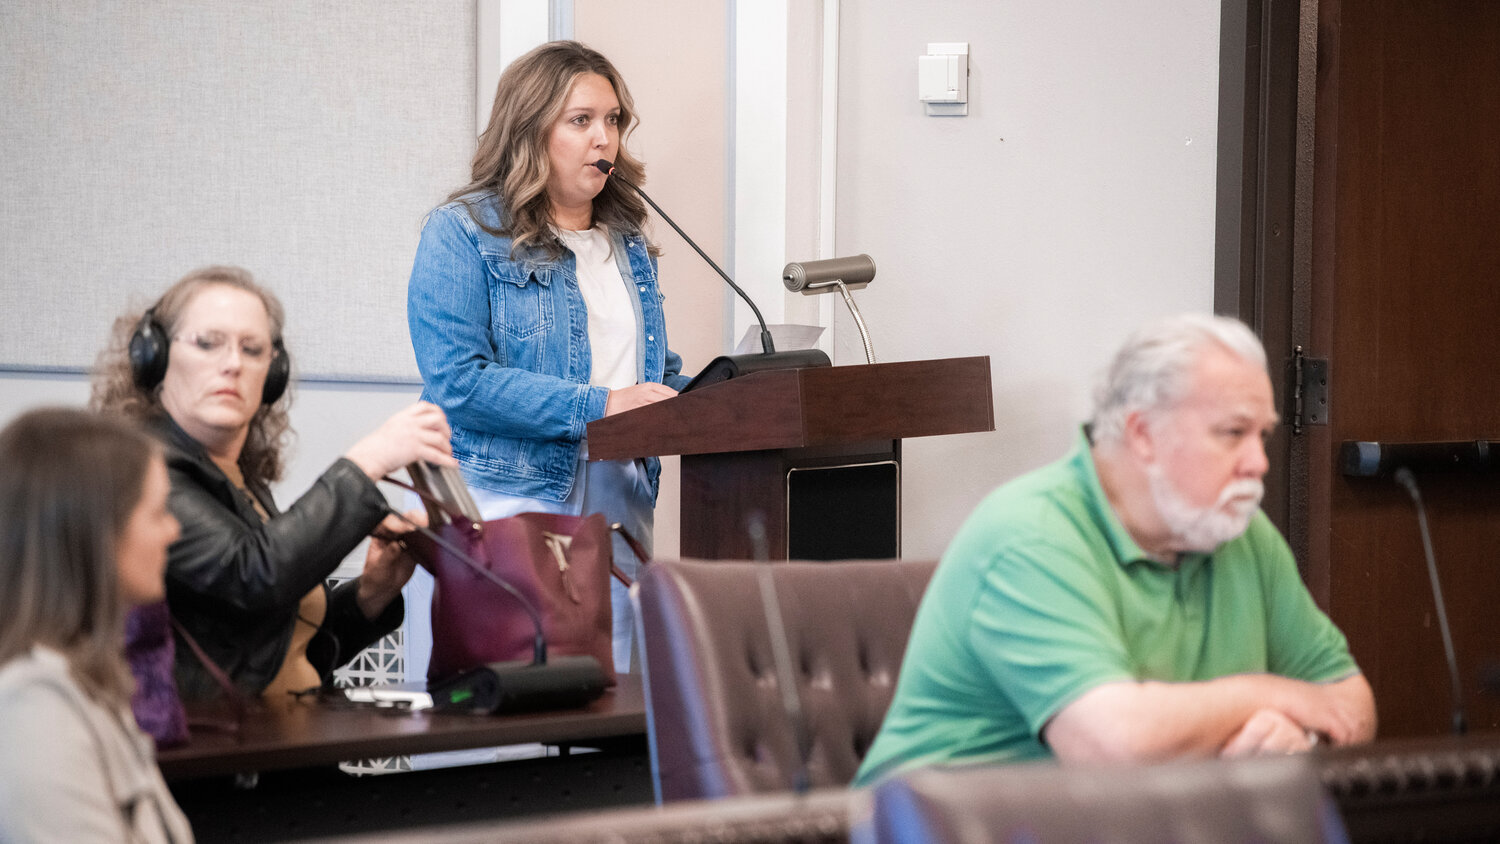 Kelsi Hamilton discusses the Lewis County Sheriff’s Office during a meeting with commissioners at the Lewis County Courthouse in Chehalis on Tuesday.